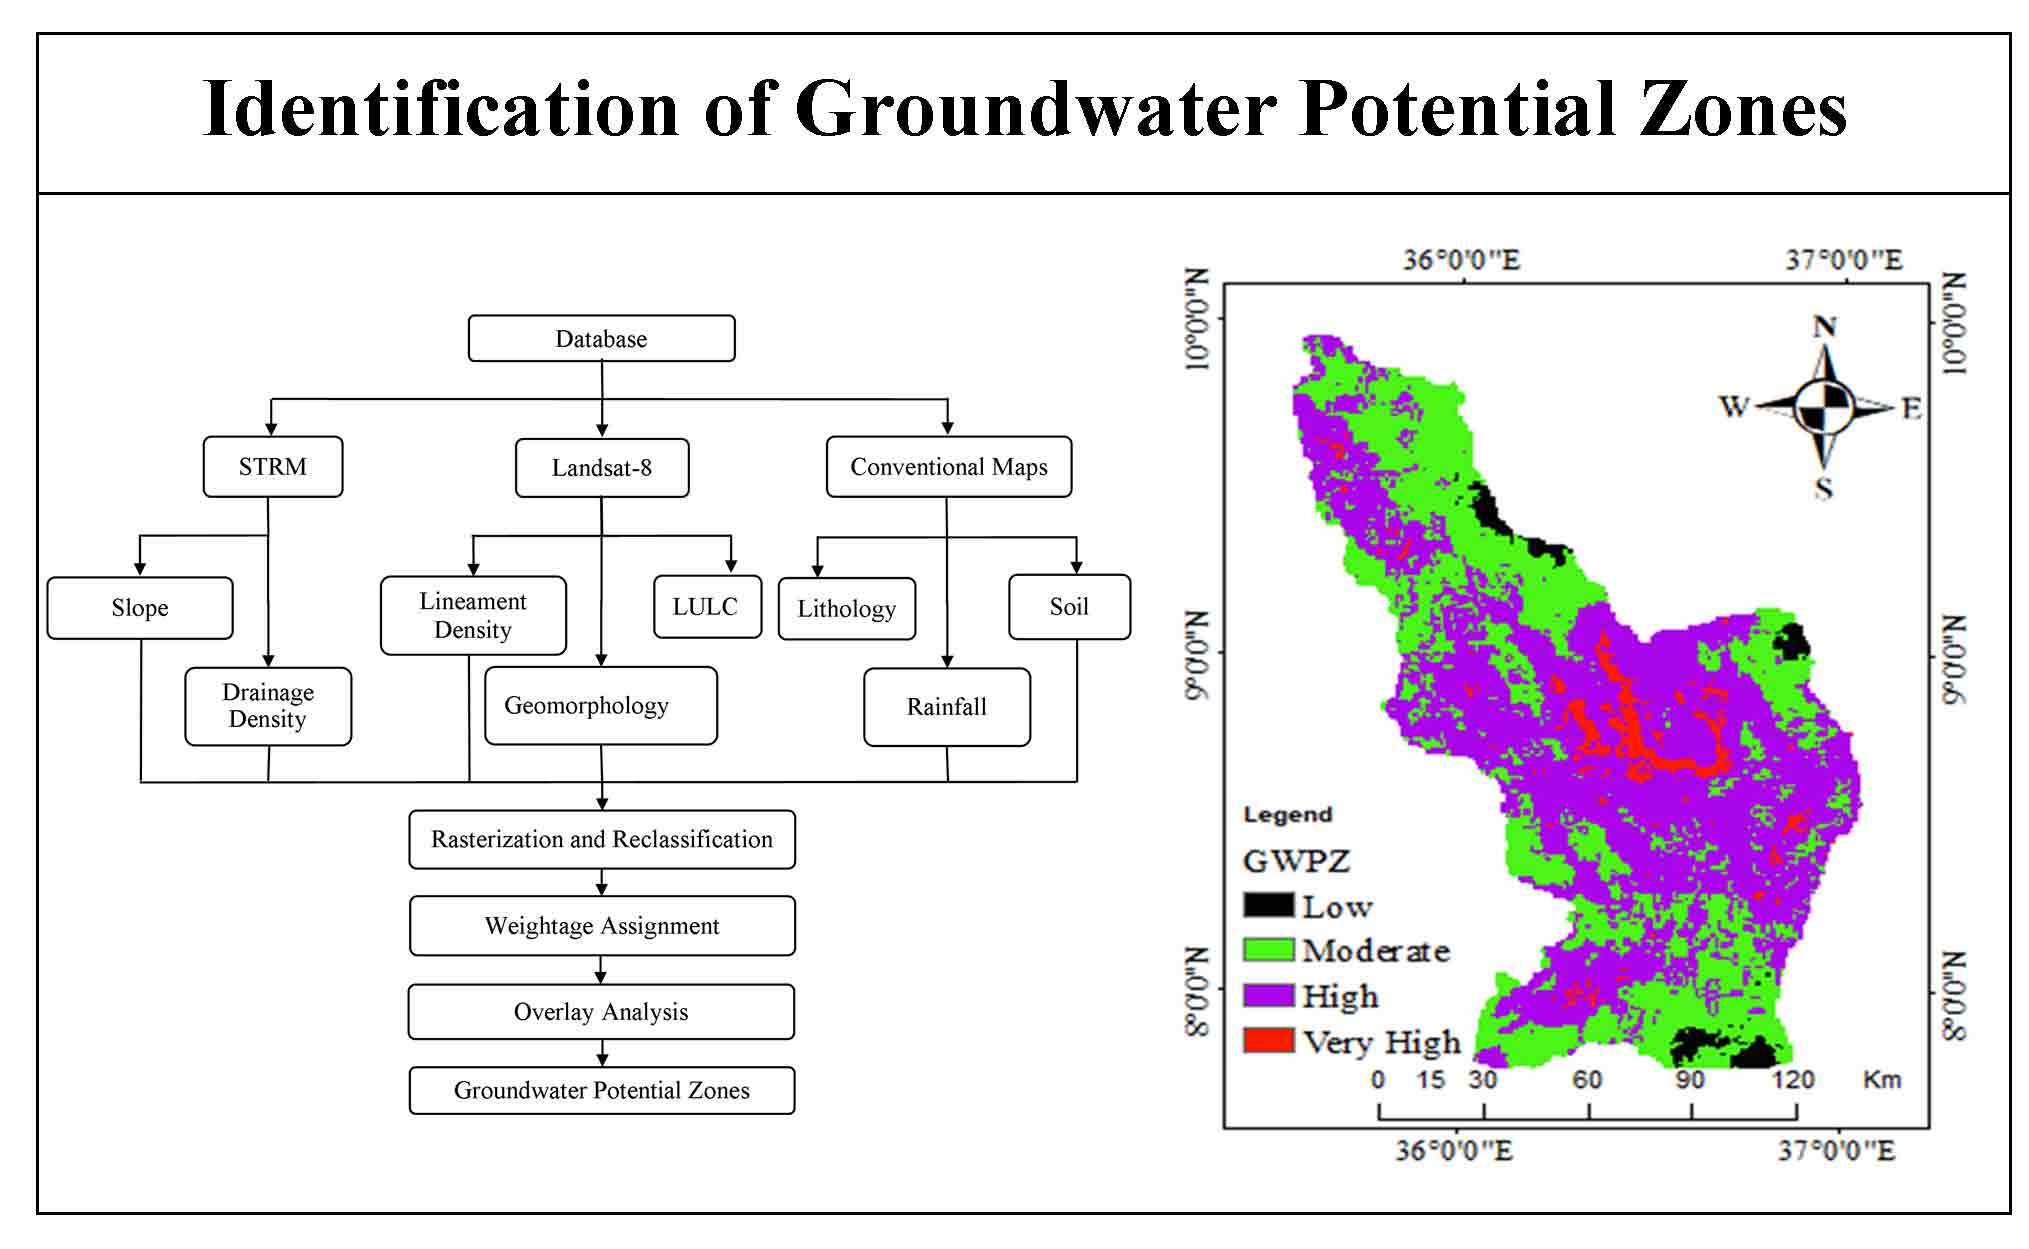 Identification of Groundwater Potential Zones Using AHP, GIS and RS Integration: A Case Study of Didessa Sub-Basin, Western Ethiopia